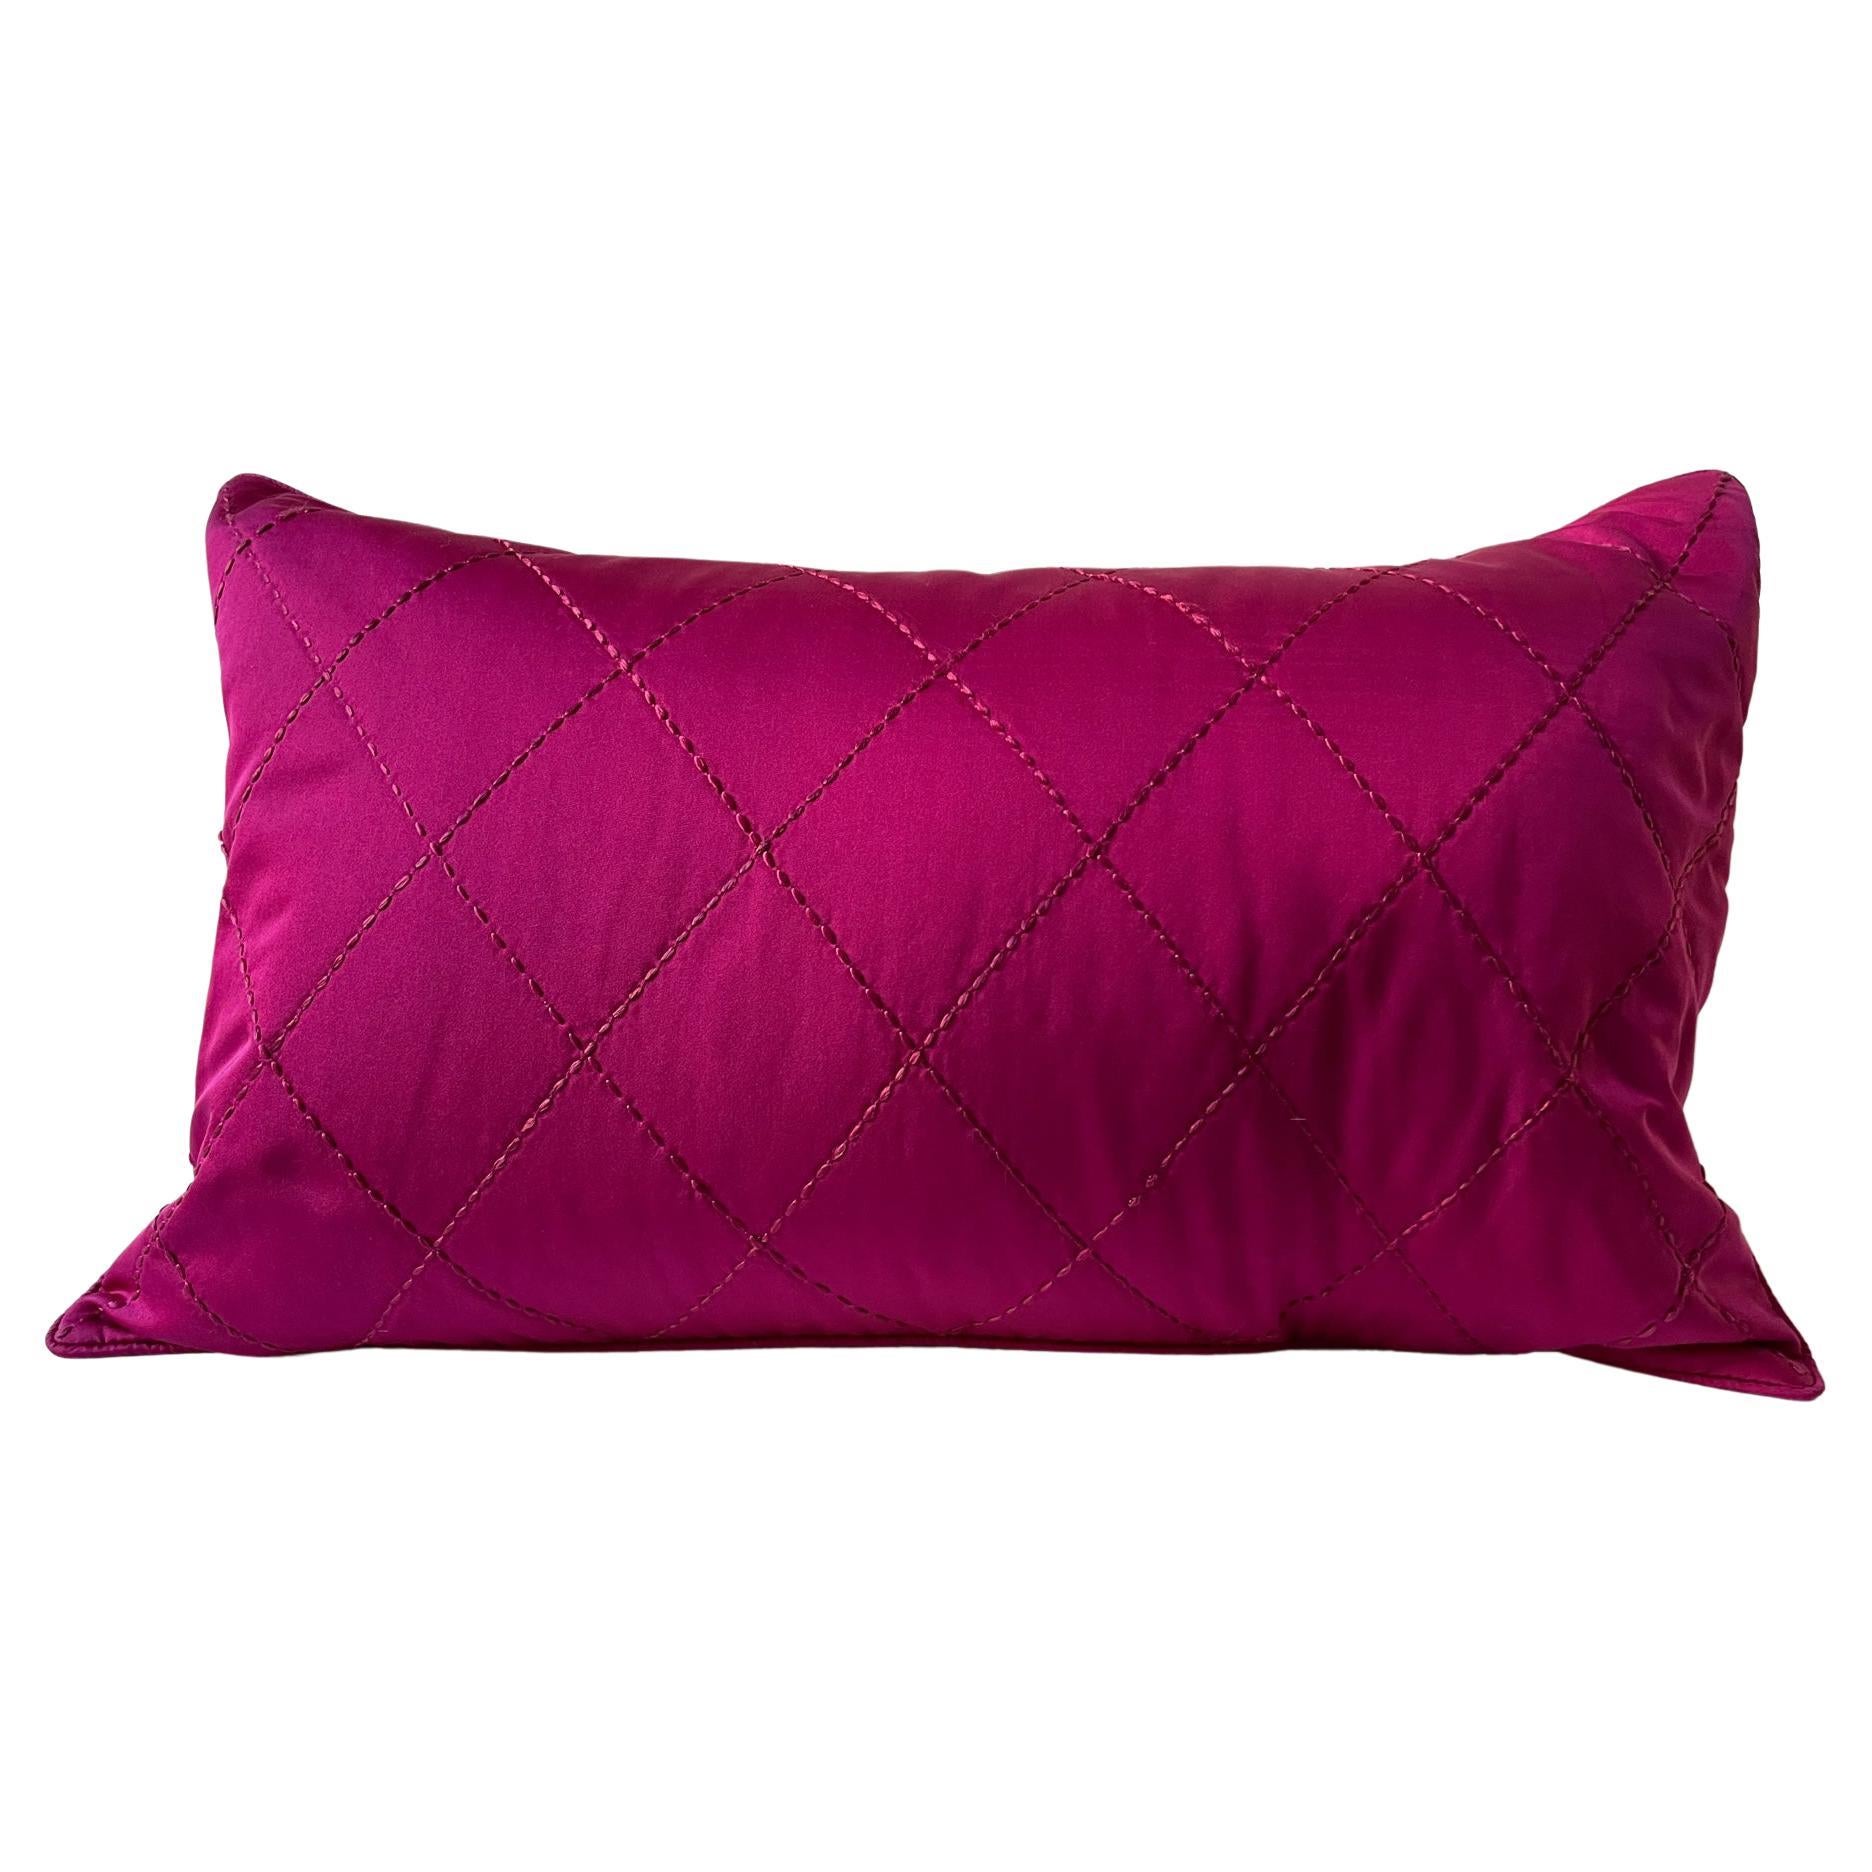 Cushion Cover Hand Quilted Rhombus Pattern in Silk Satin Cherry Red For Sale